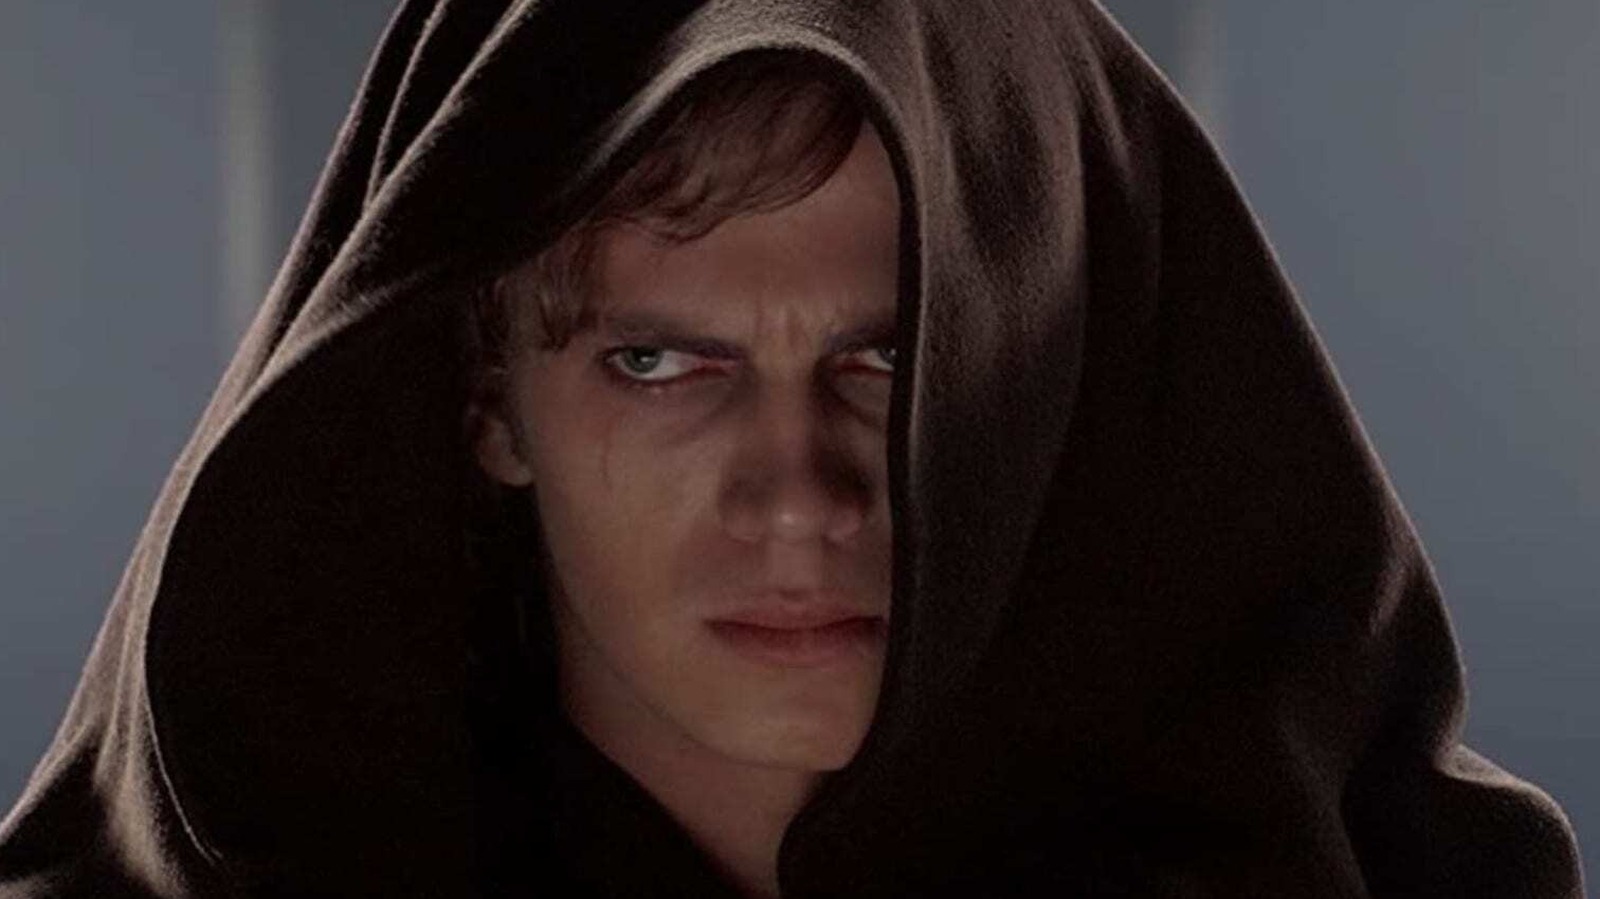 #Hayden Christensen Nearly Talked Himself Out Of Auditioning For Anakin Skywalker